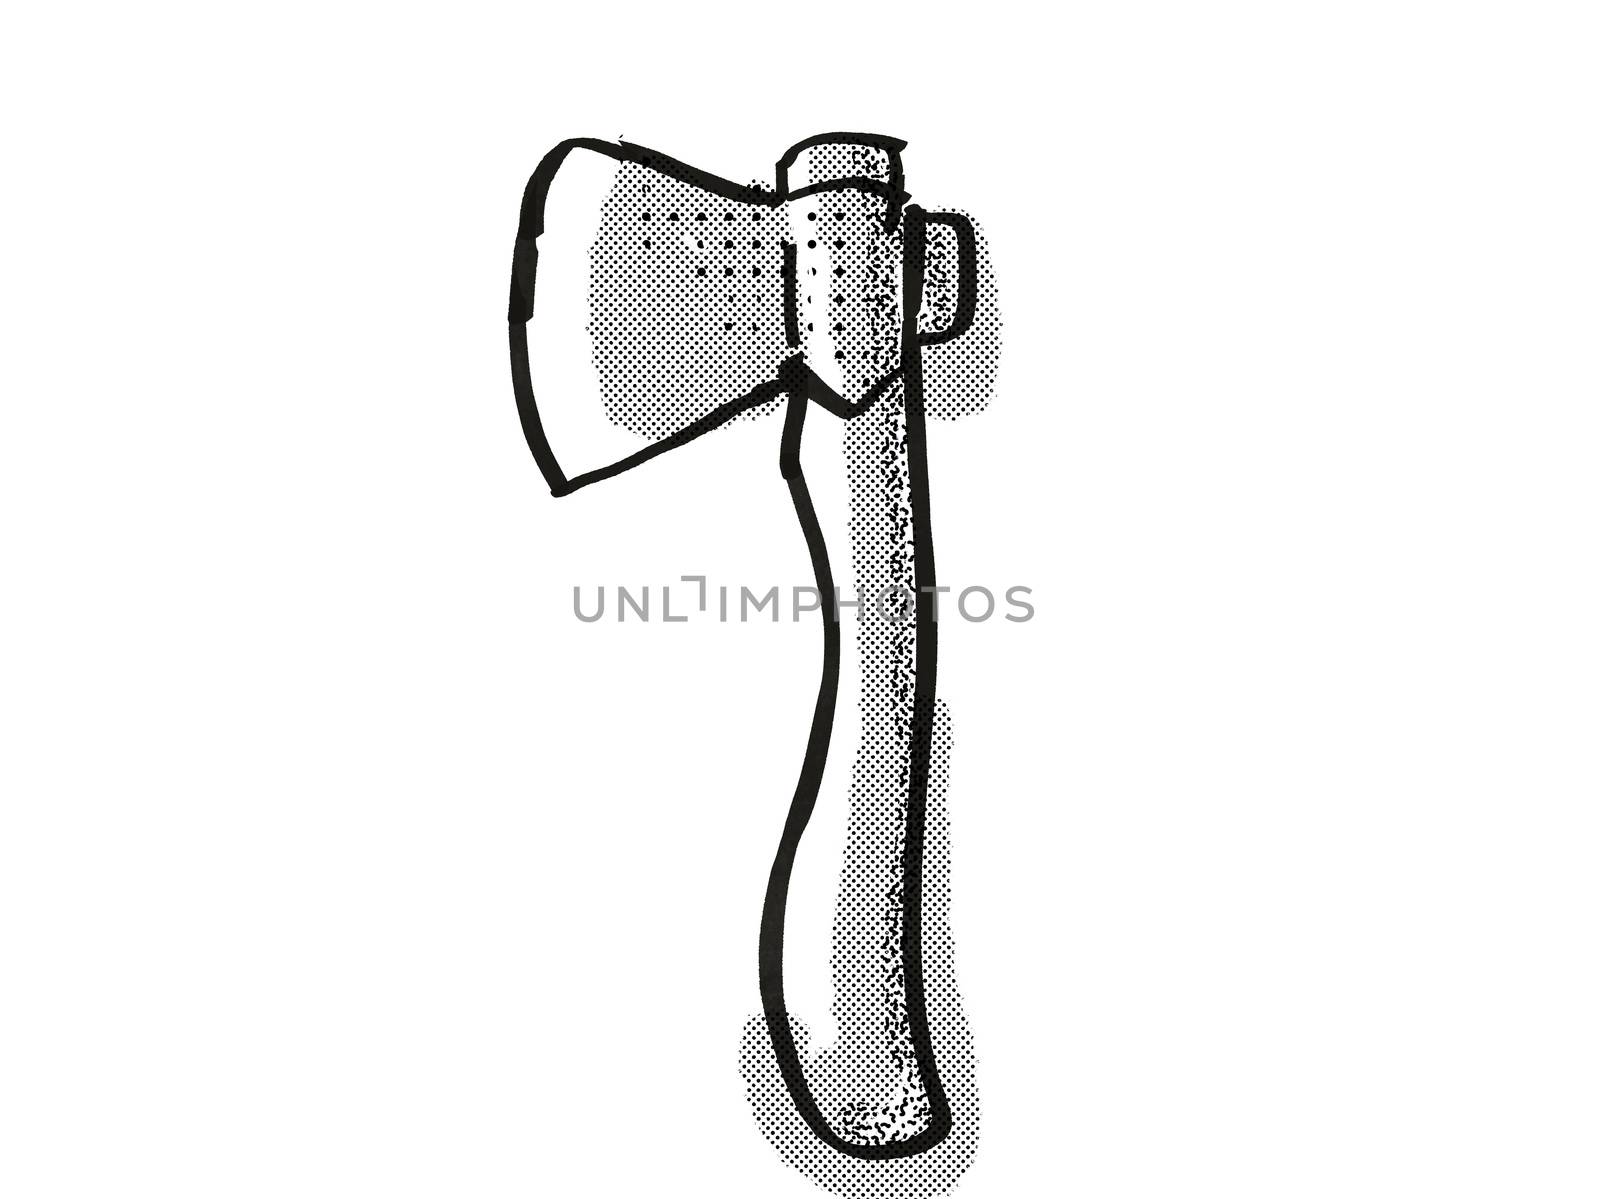 Retro cartoon style drawing of a hatchet , a woodworking hand tool  on isolated white background done in black and white